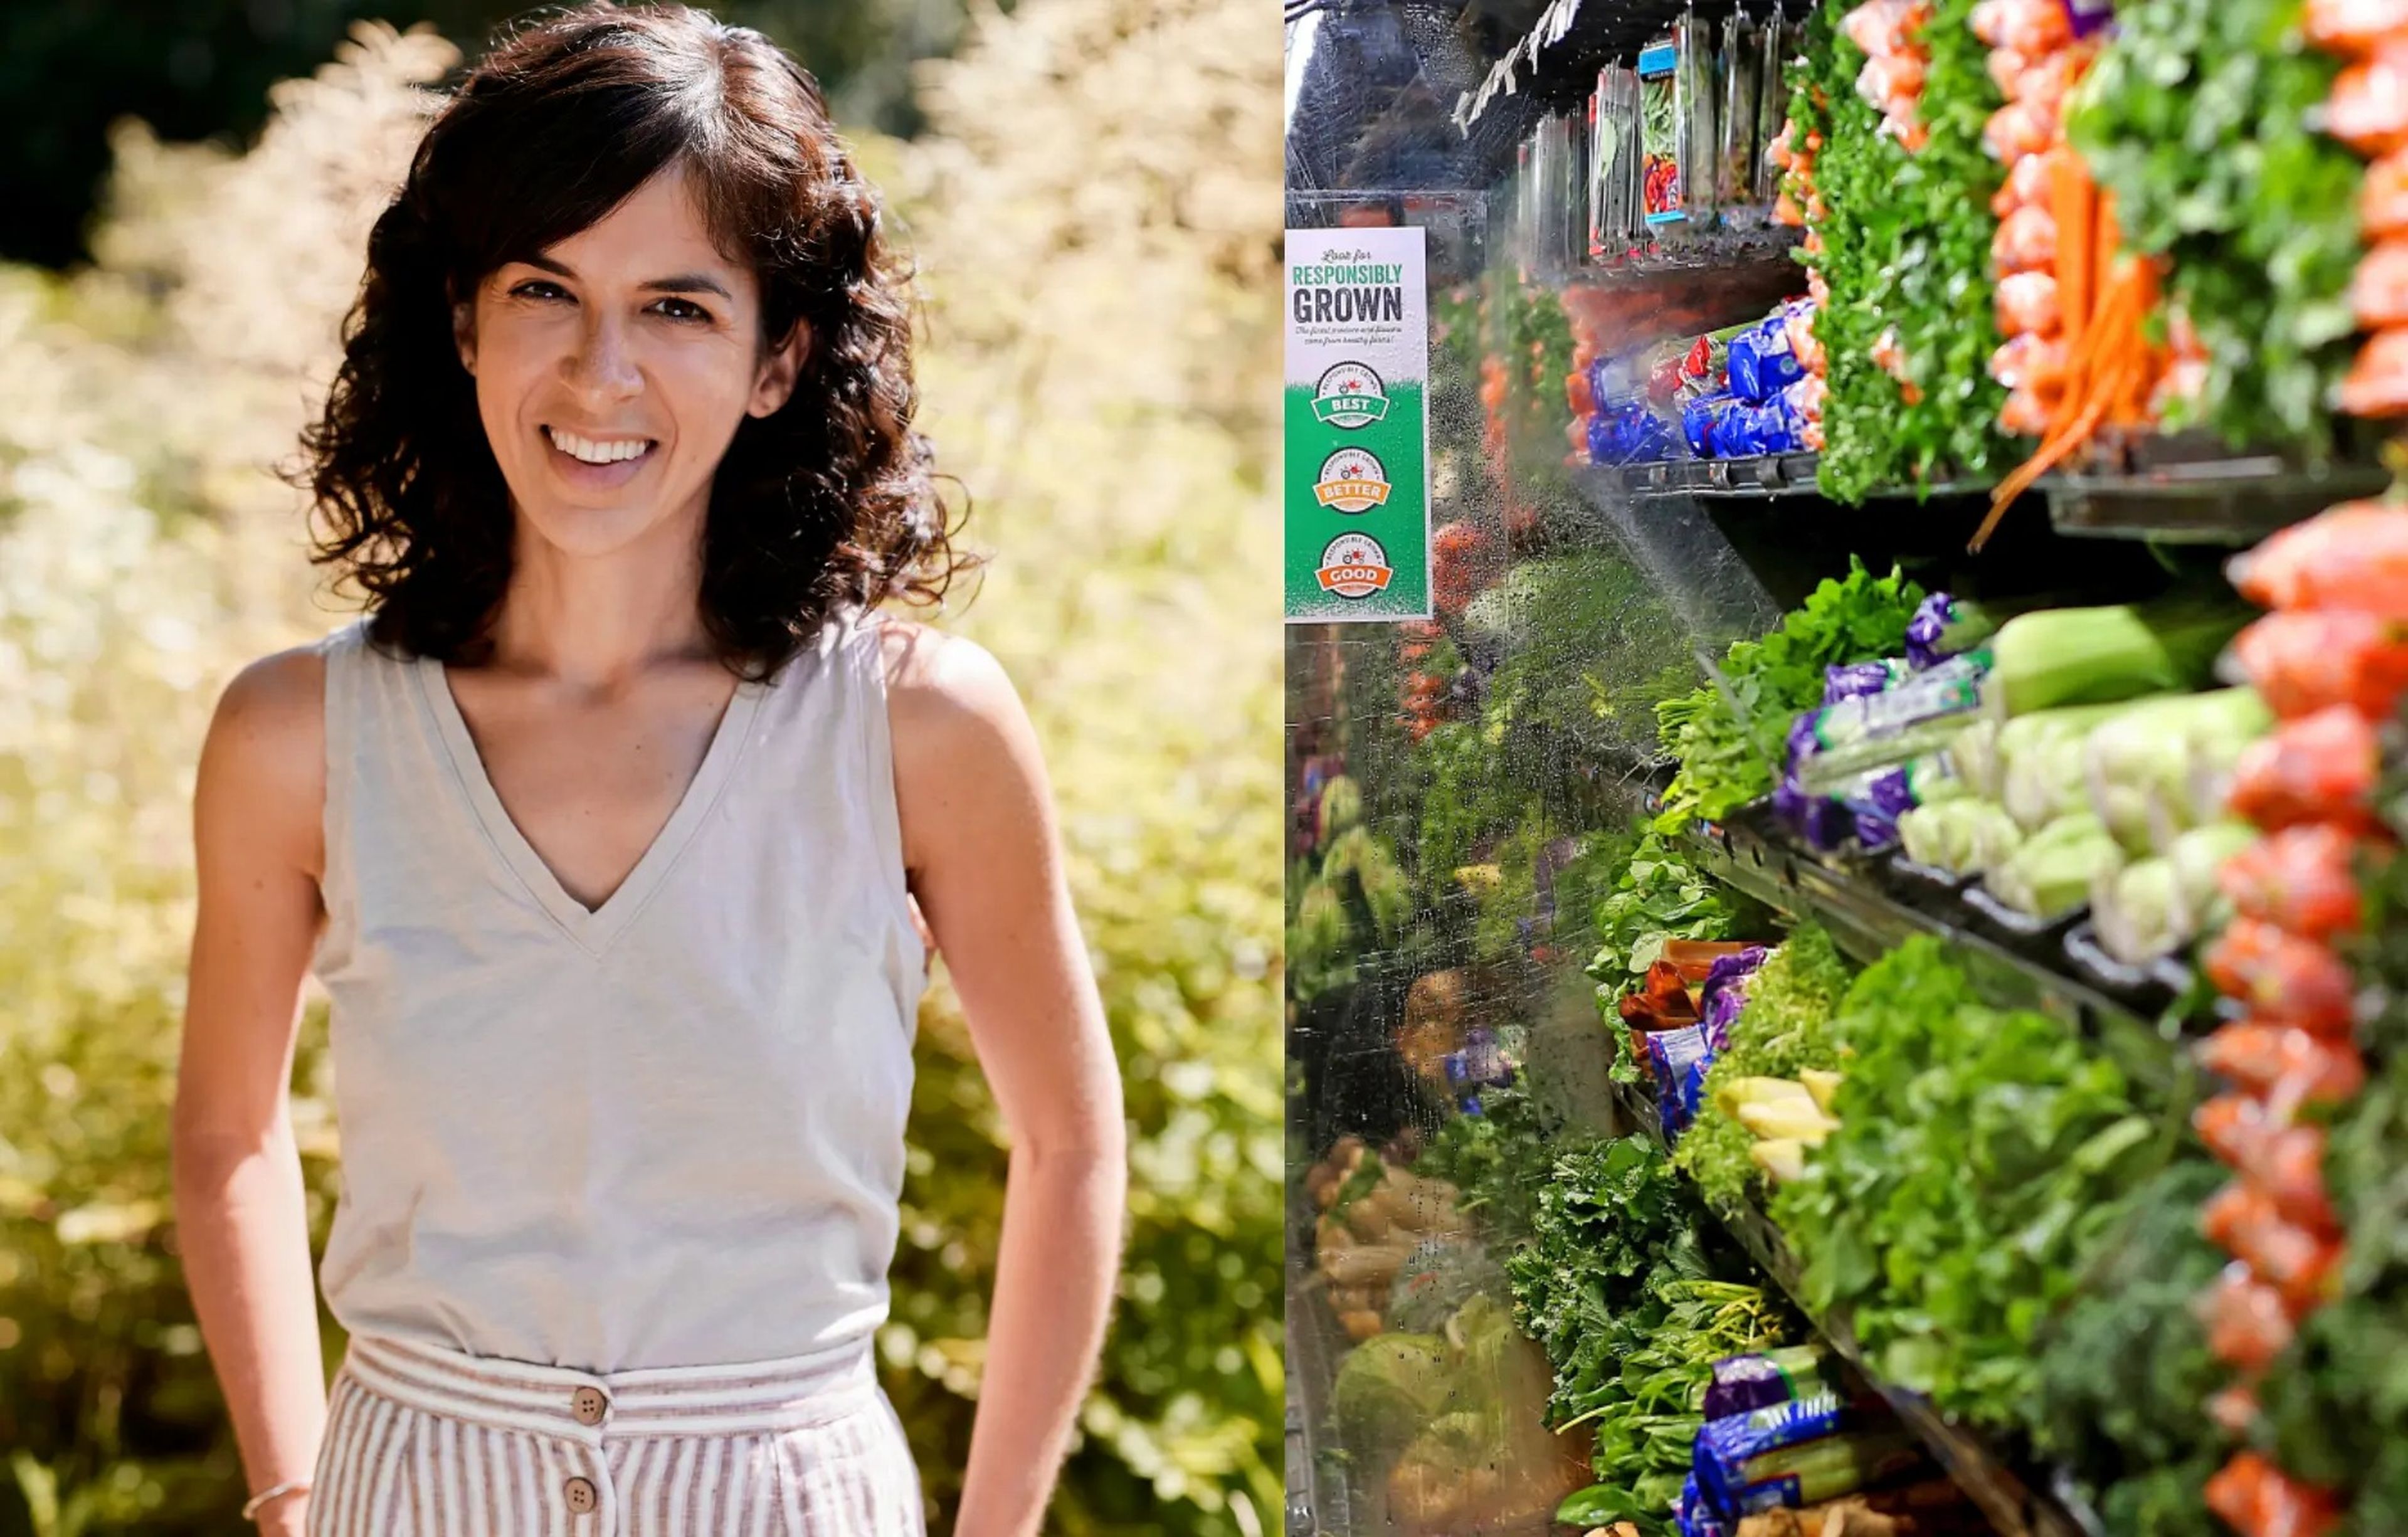 A split image showing a picture of registered dietitian Sheela Prakash next to an image of a grocery store produce aisle full of leafy greens.